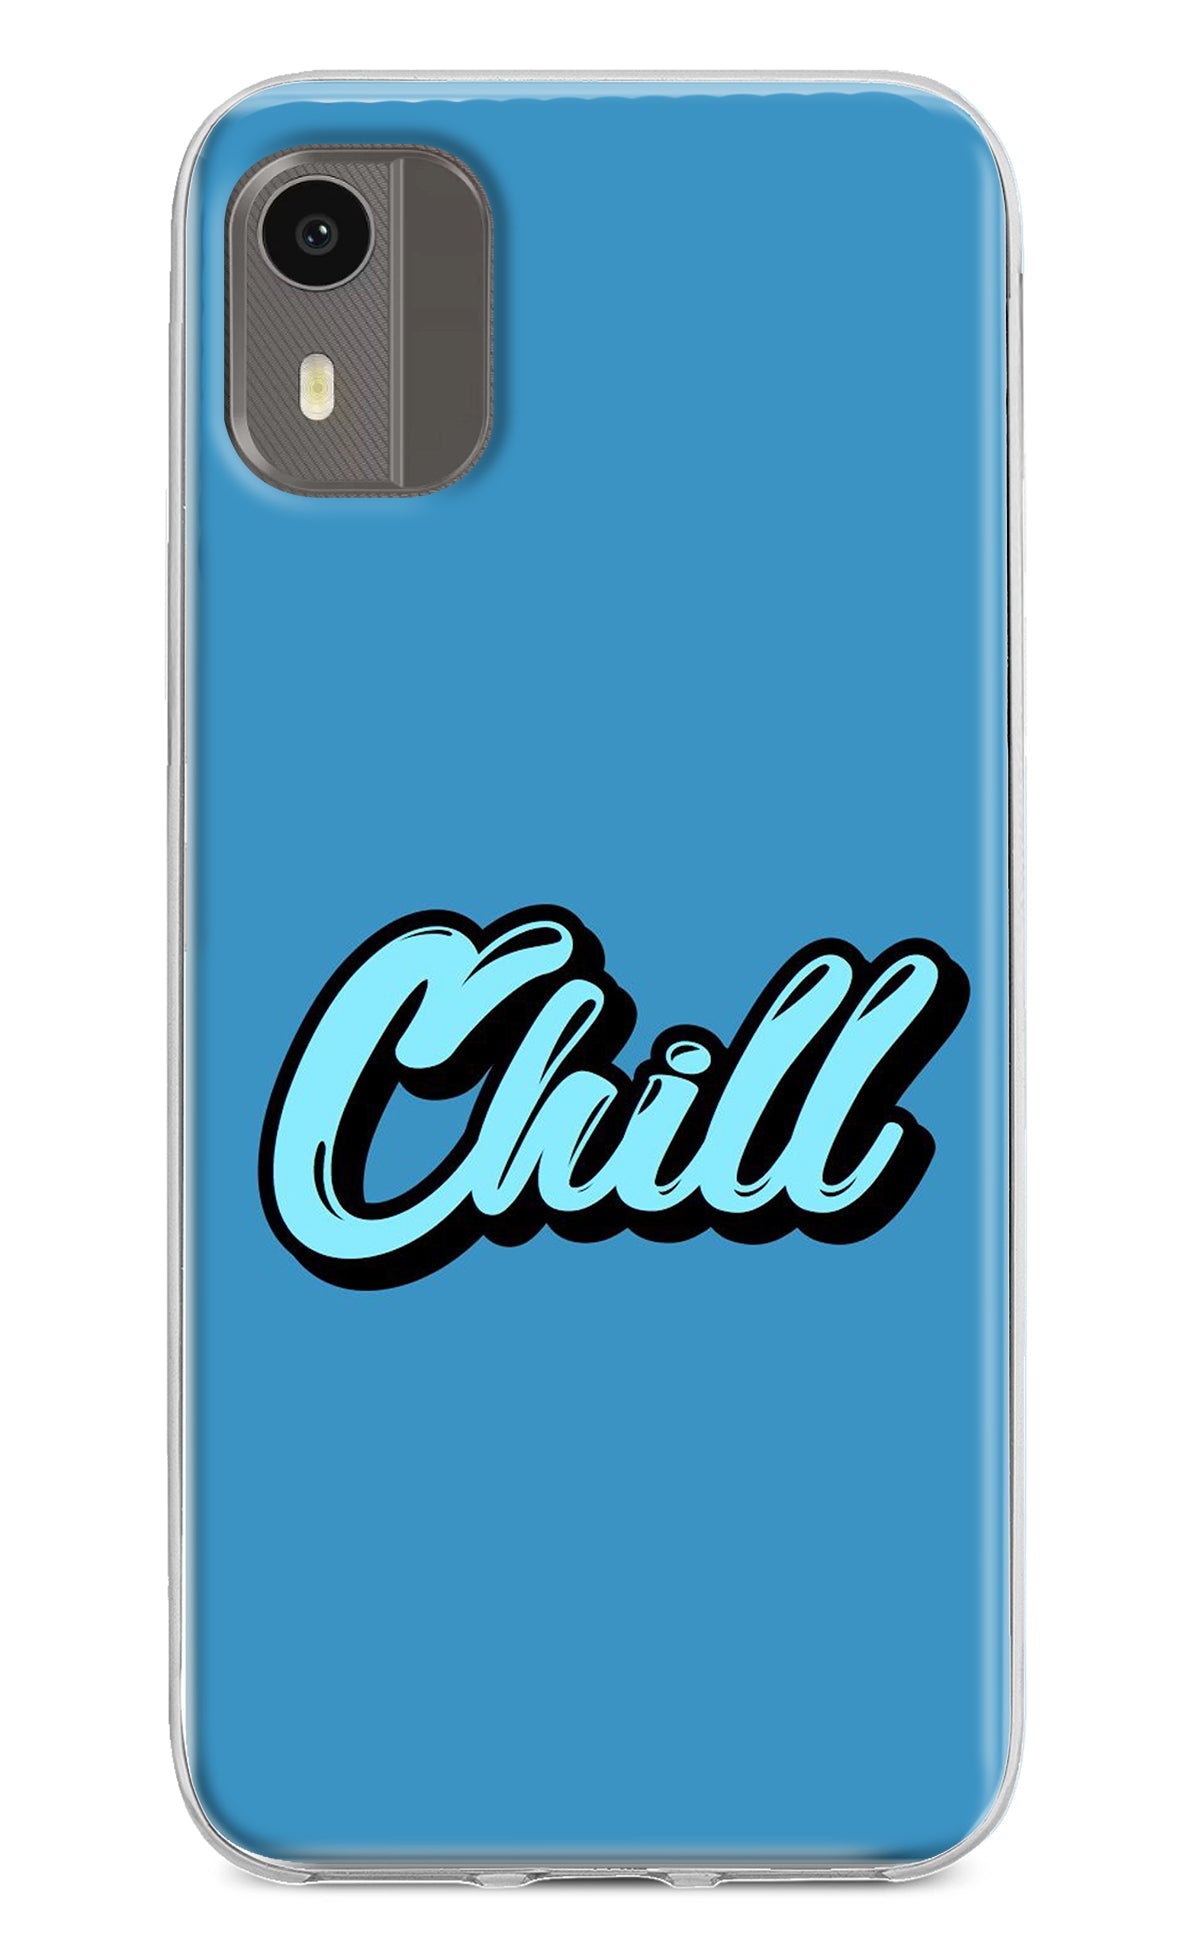 Chill Nokia C12/C12 Pro Back Cover